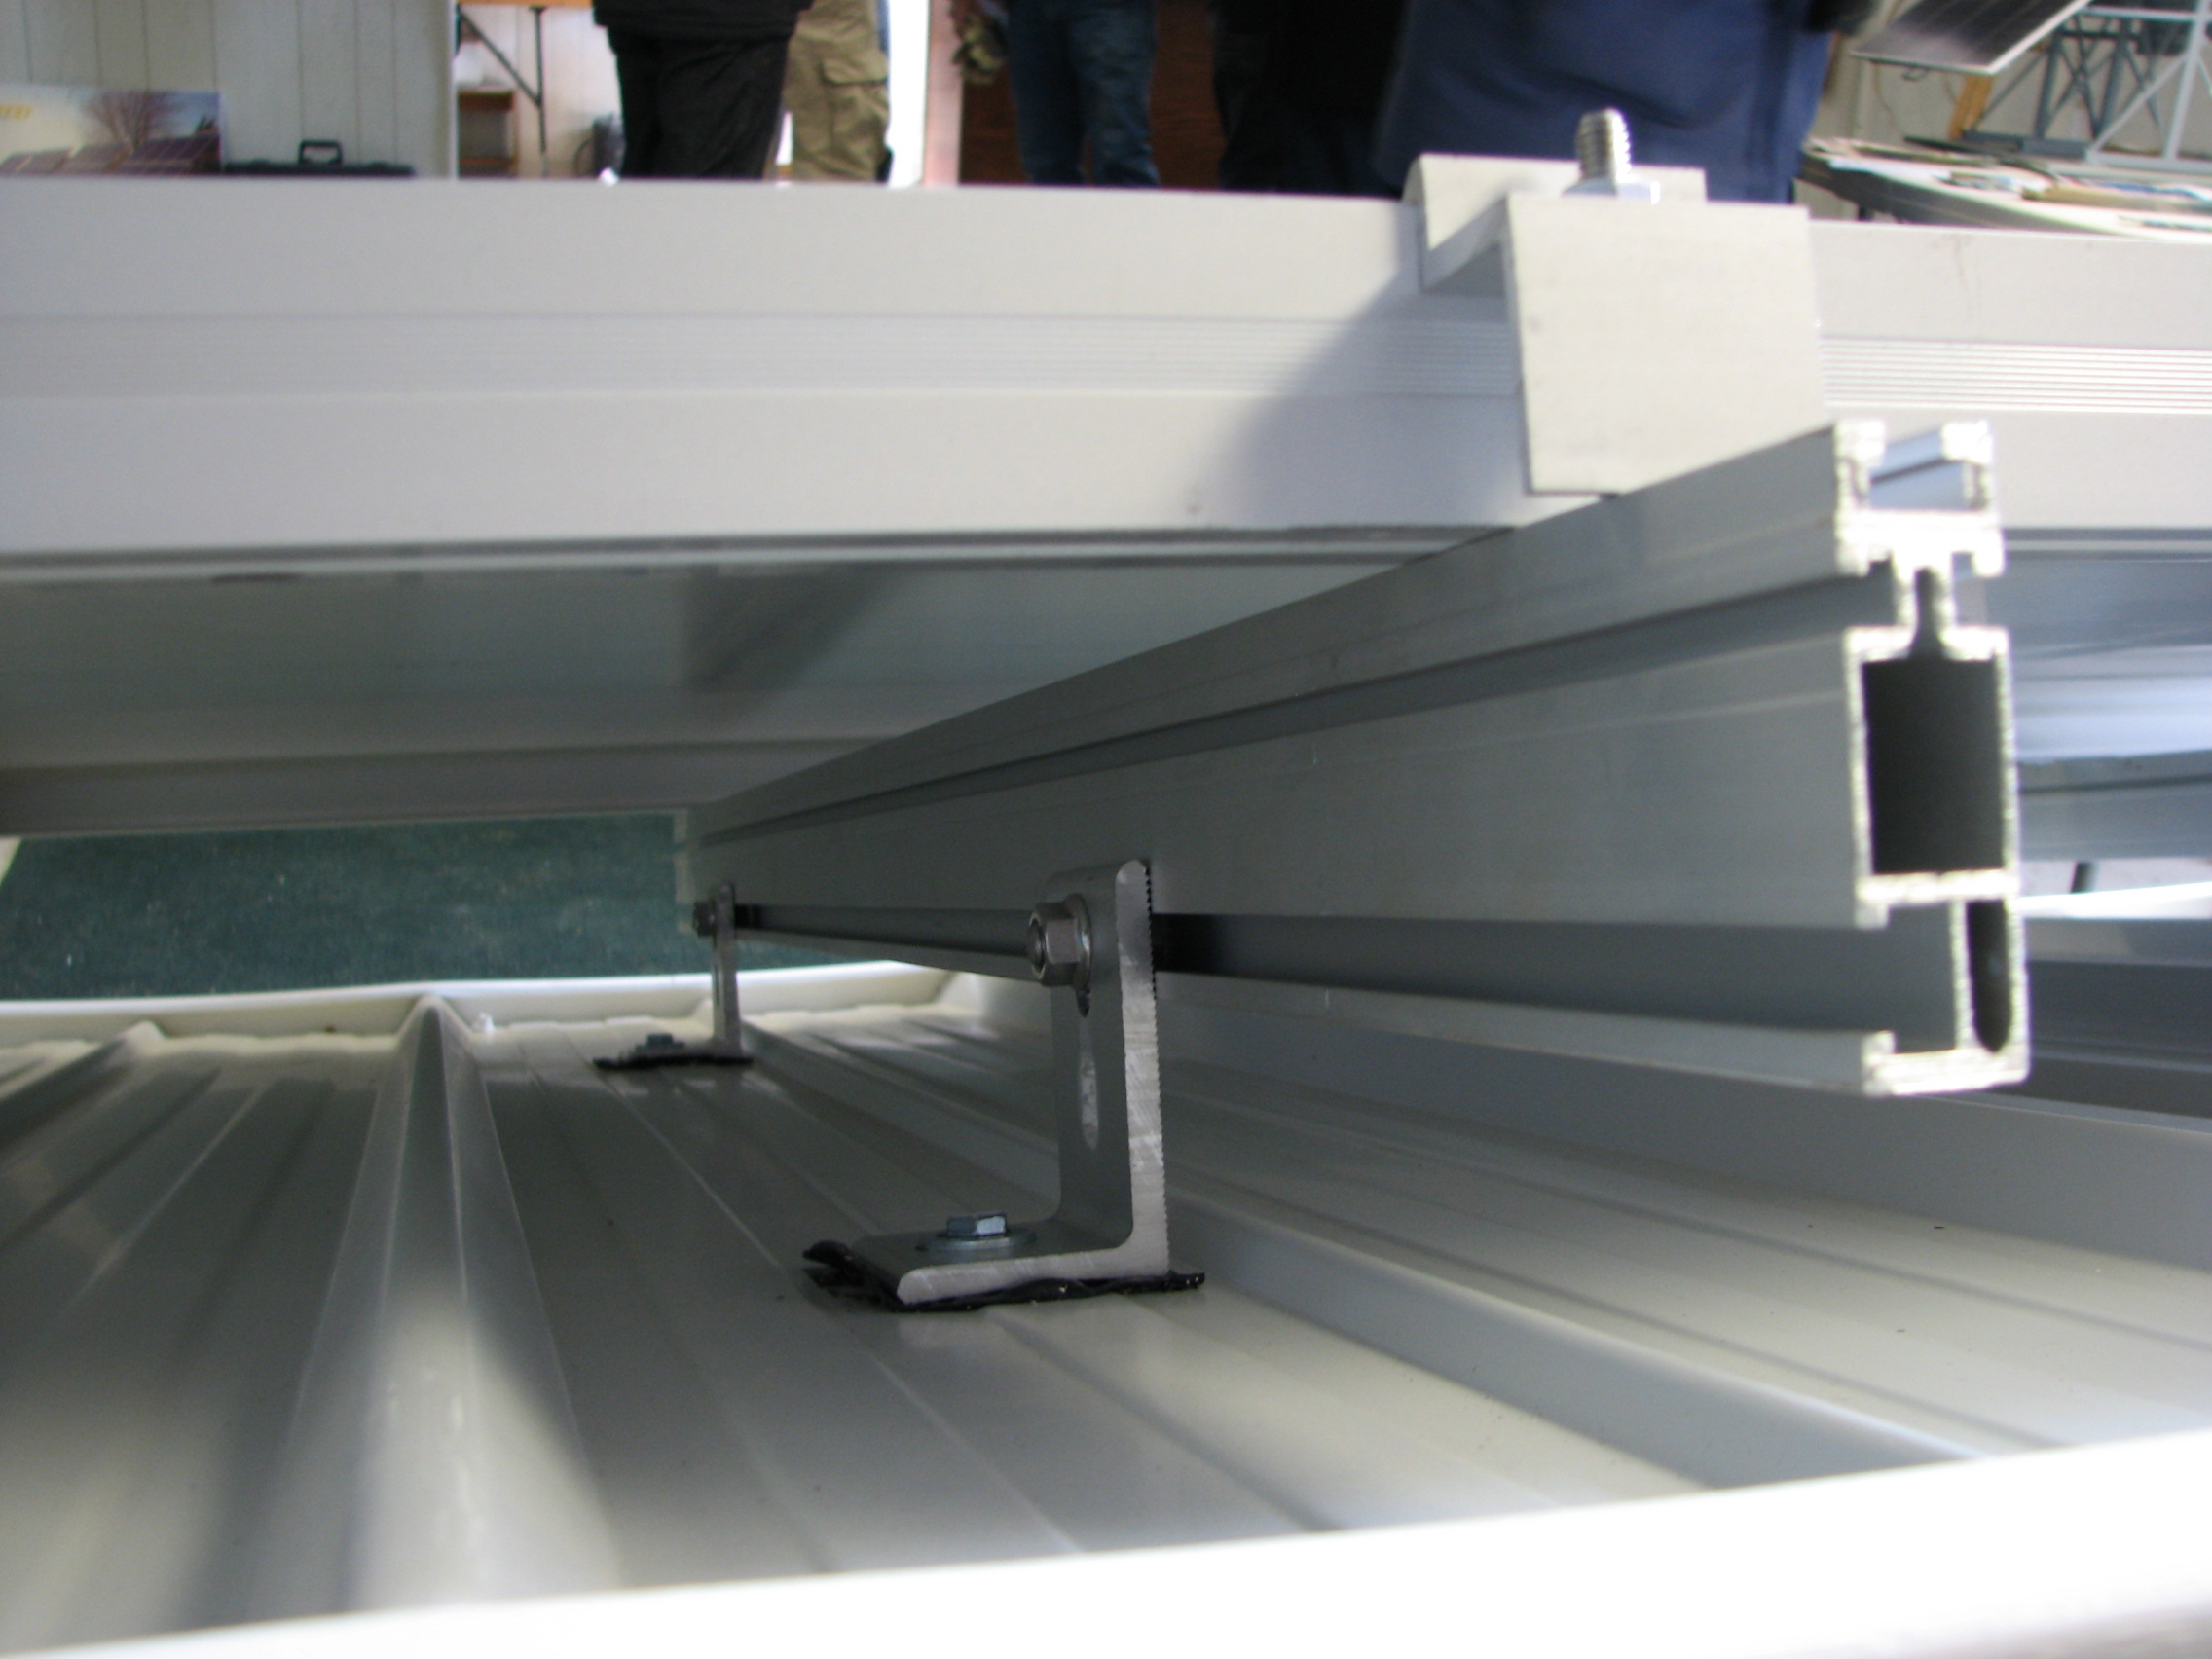 close-up of a solar panel installed on aluminum rails, which are attached to the roof at specified spacings